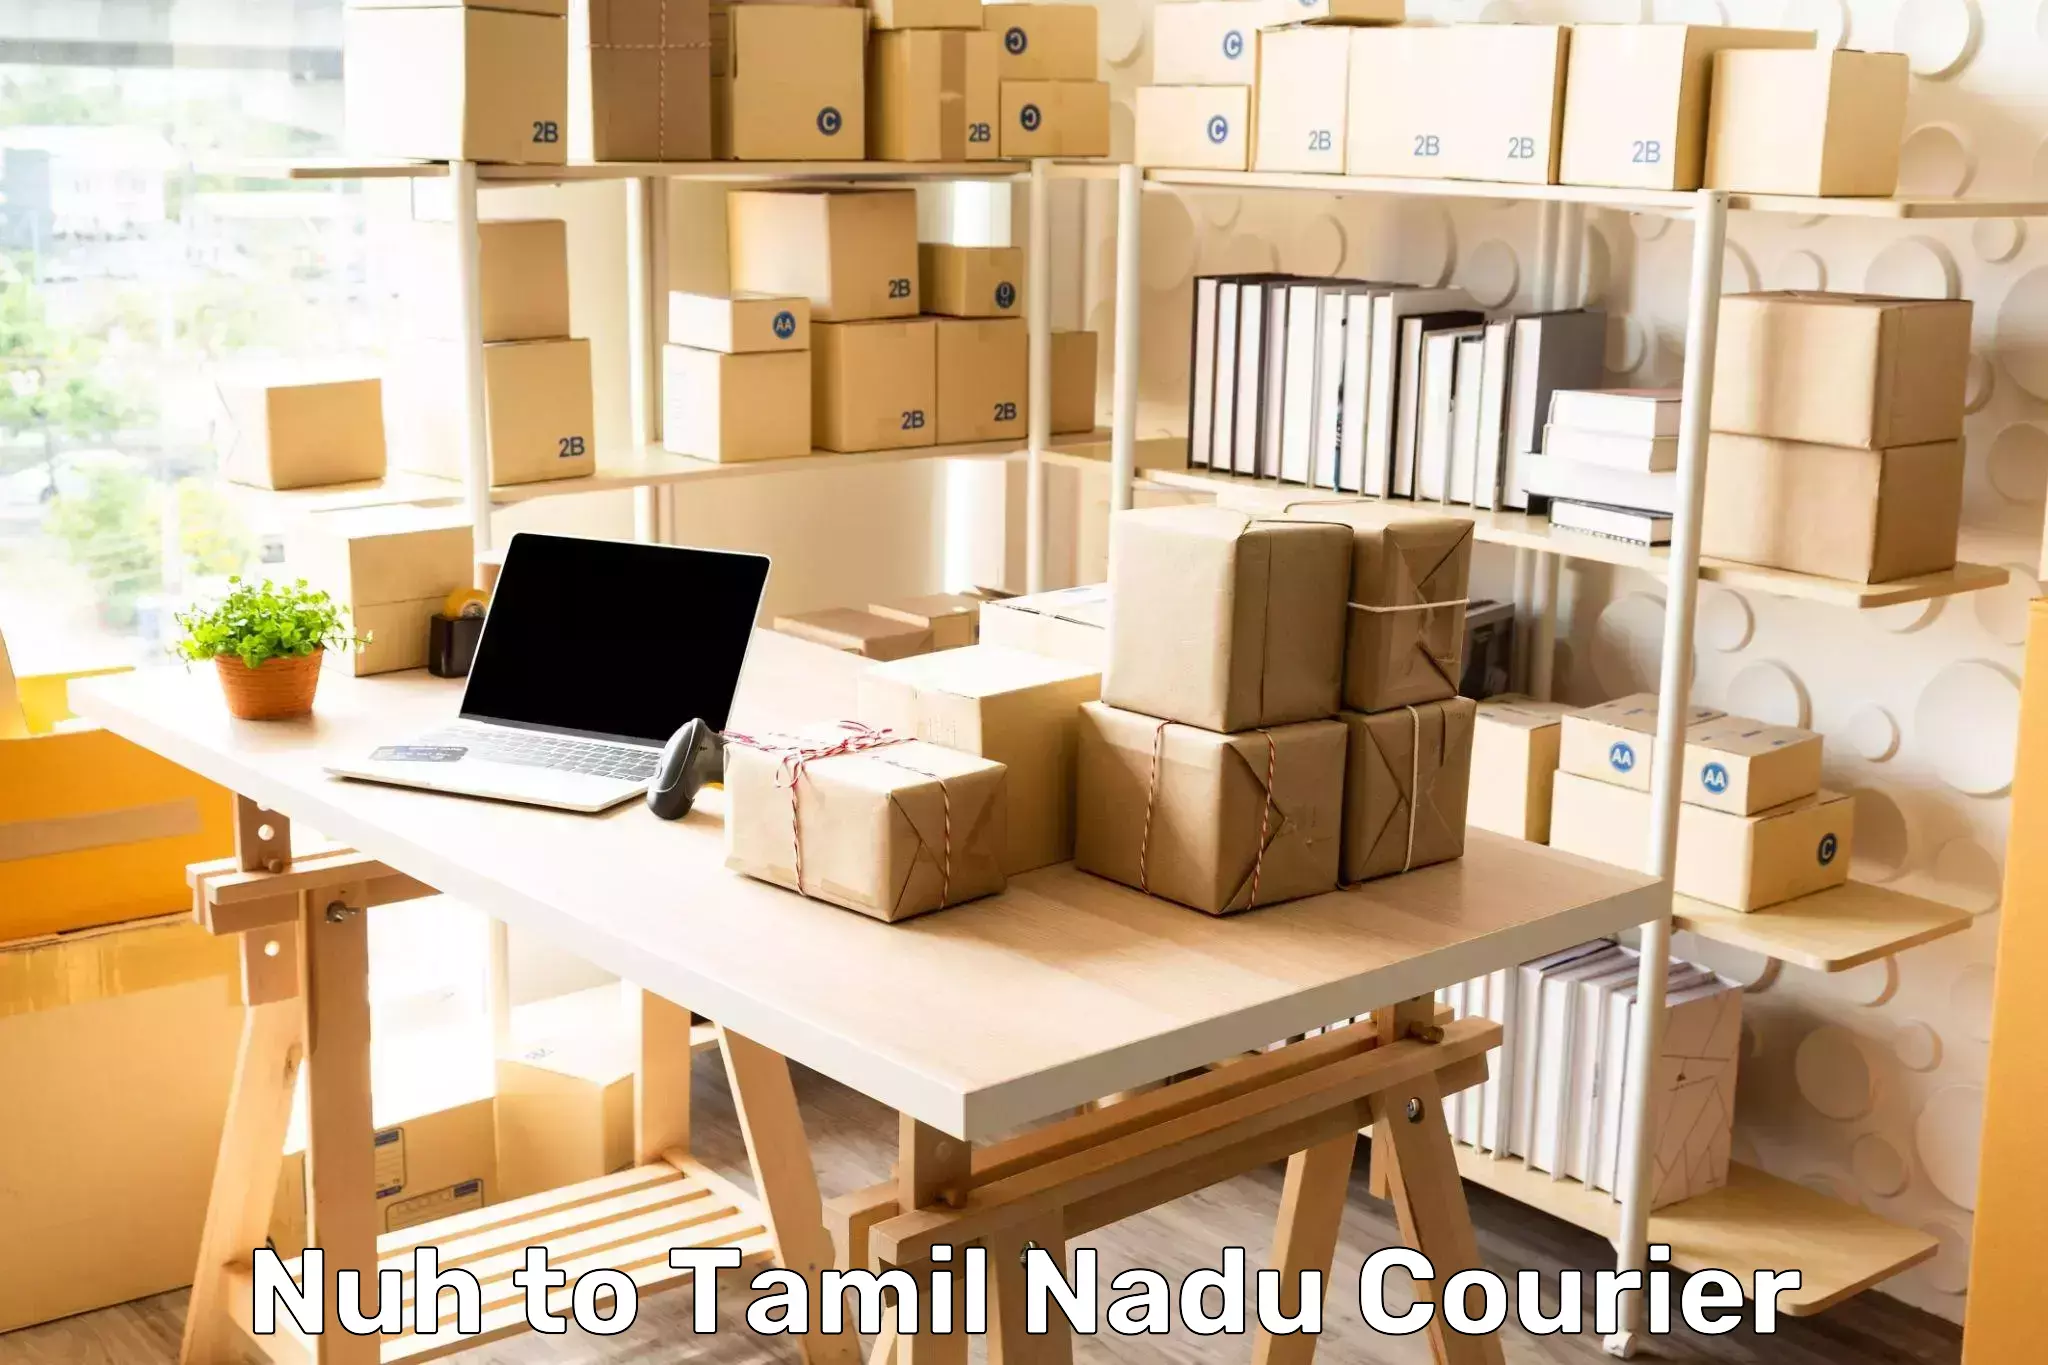 24-hour courier services in Nuh to Ranipet